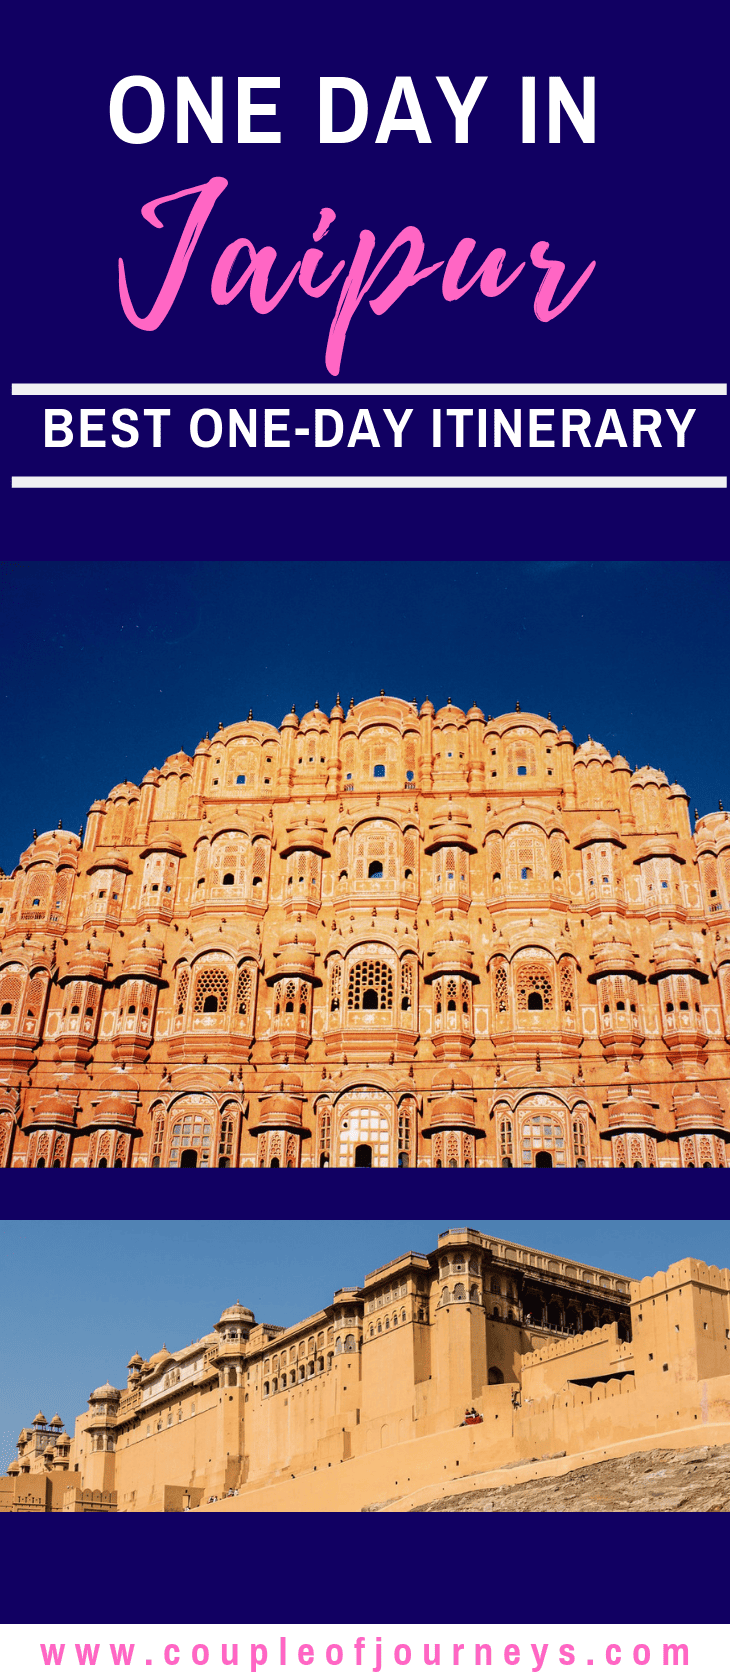 A useful guide on the best places to visit in Jaipur in one day